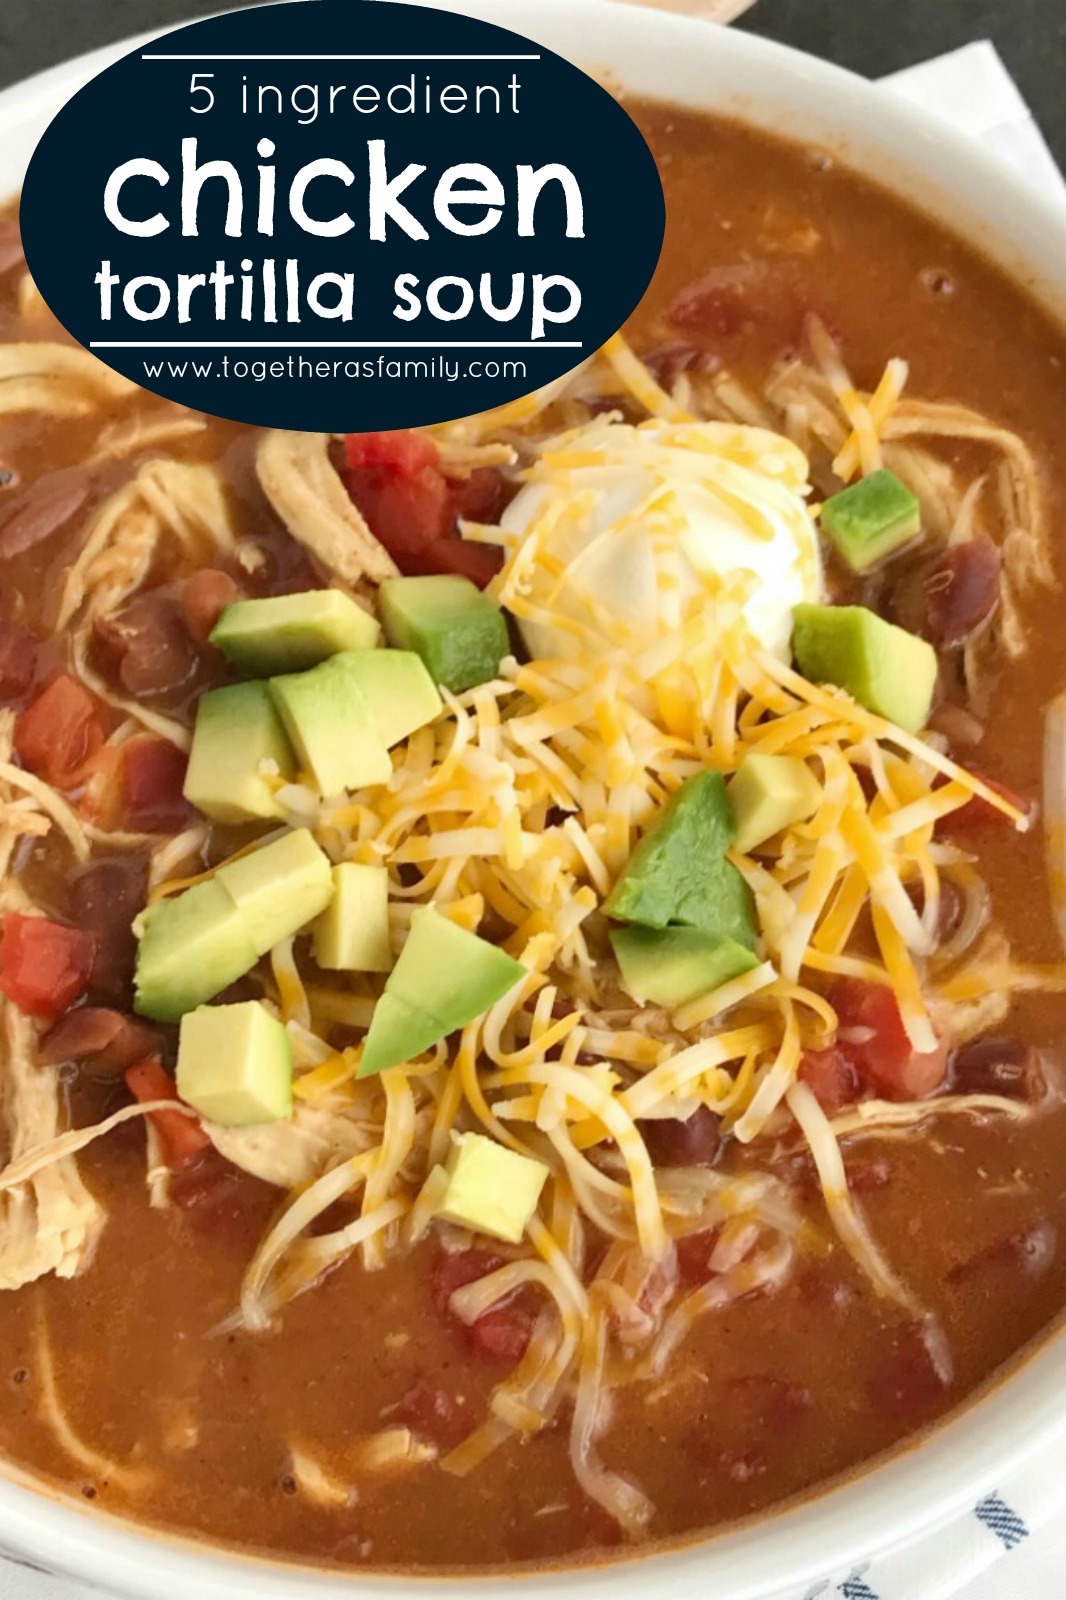 {5 INGREDIENT} CHICKEN TORTILLA SOUP | The best 5 ingredient chicken tortilla soup only takes 20 minutes to make! One pot is all you need for this delicious and creamy tortilla soup. Combine 5 ingredients + some spices and let it simmer on the stove top. Top with cheese, avocado, chips, and sour cream. #souprecipes #chickentortillasoup #easydinnerrecipes #dinnerideas #chicken #recipeoftheday